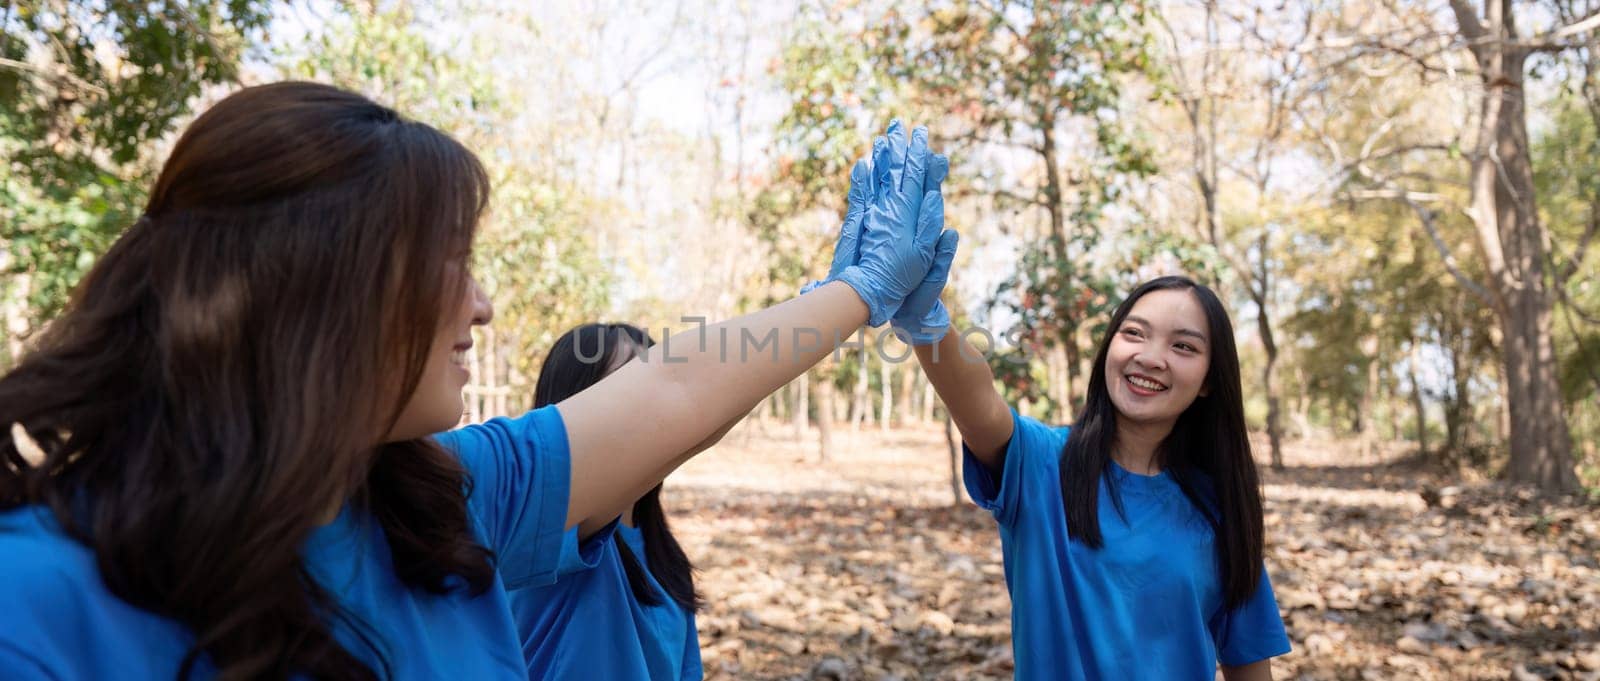 Female volunteer high fiving in forest. Concept of teamwork, unity, and environmental service.